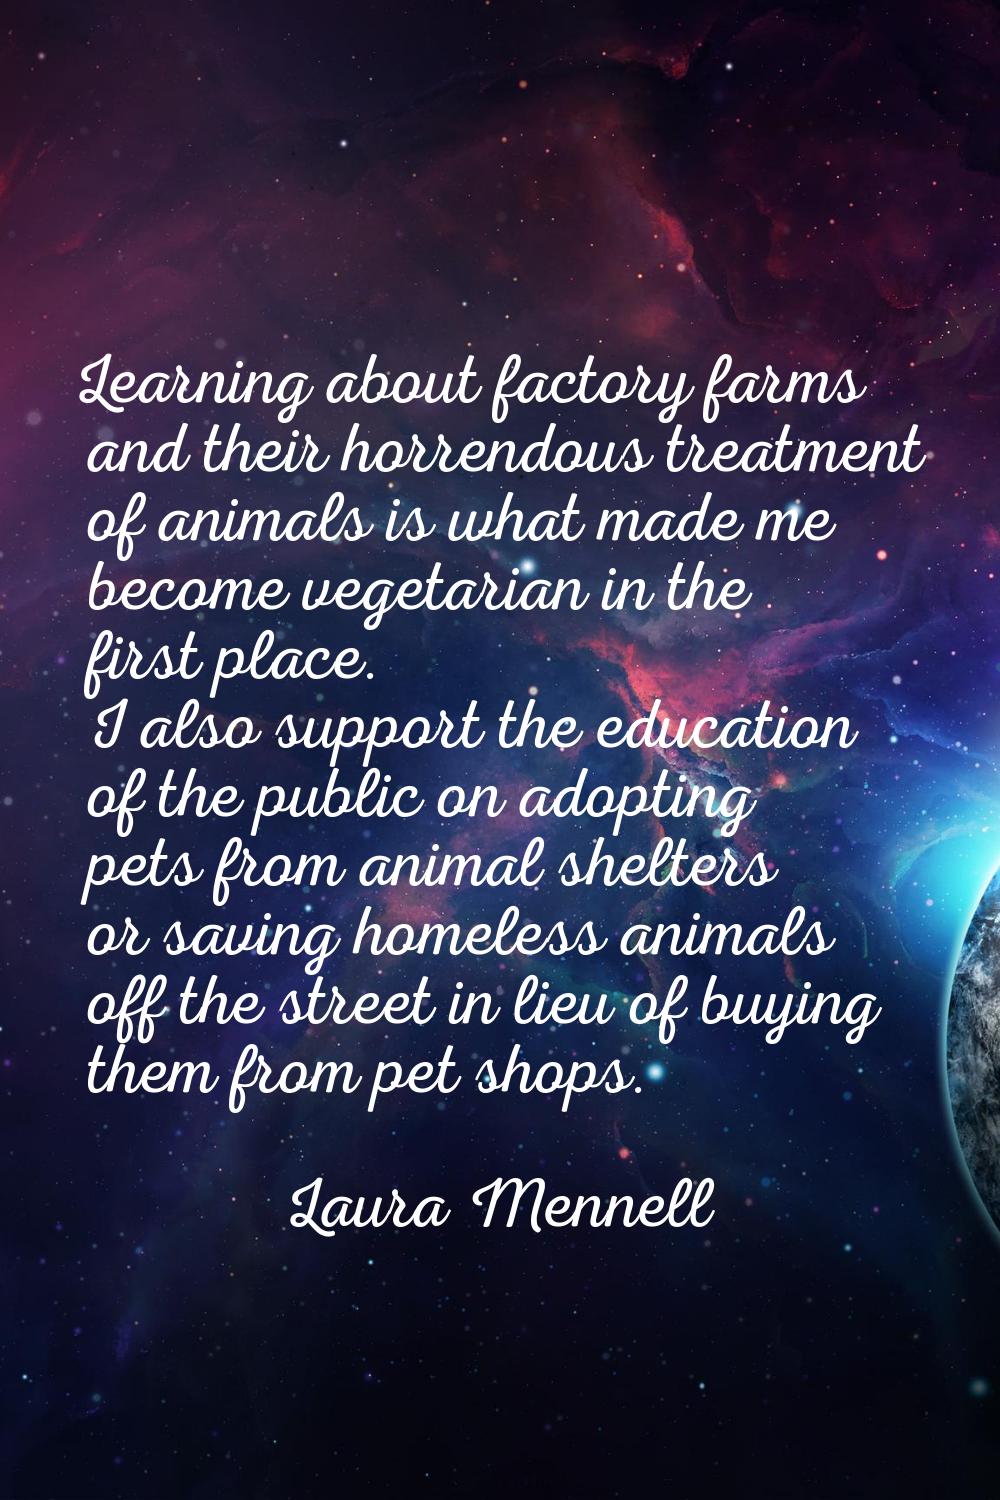 Learning about factory farms and their horrendous treatment of animals is what made me become veget